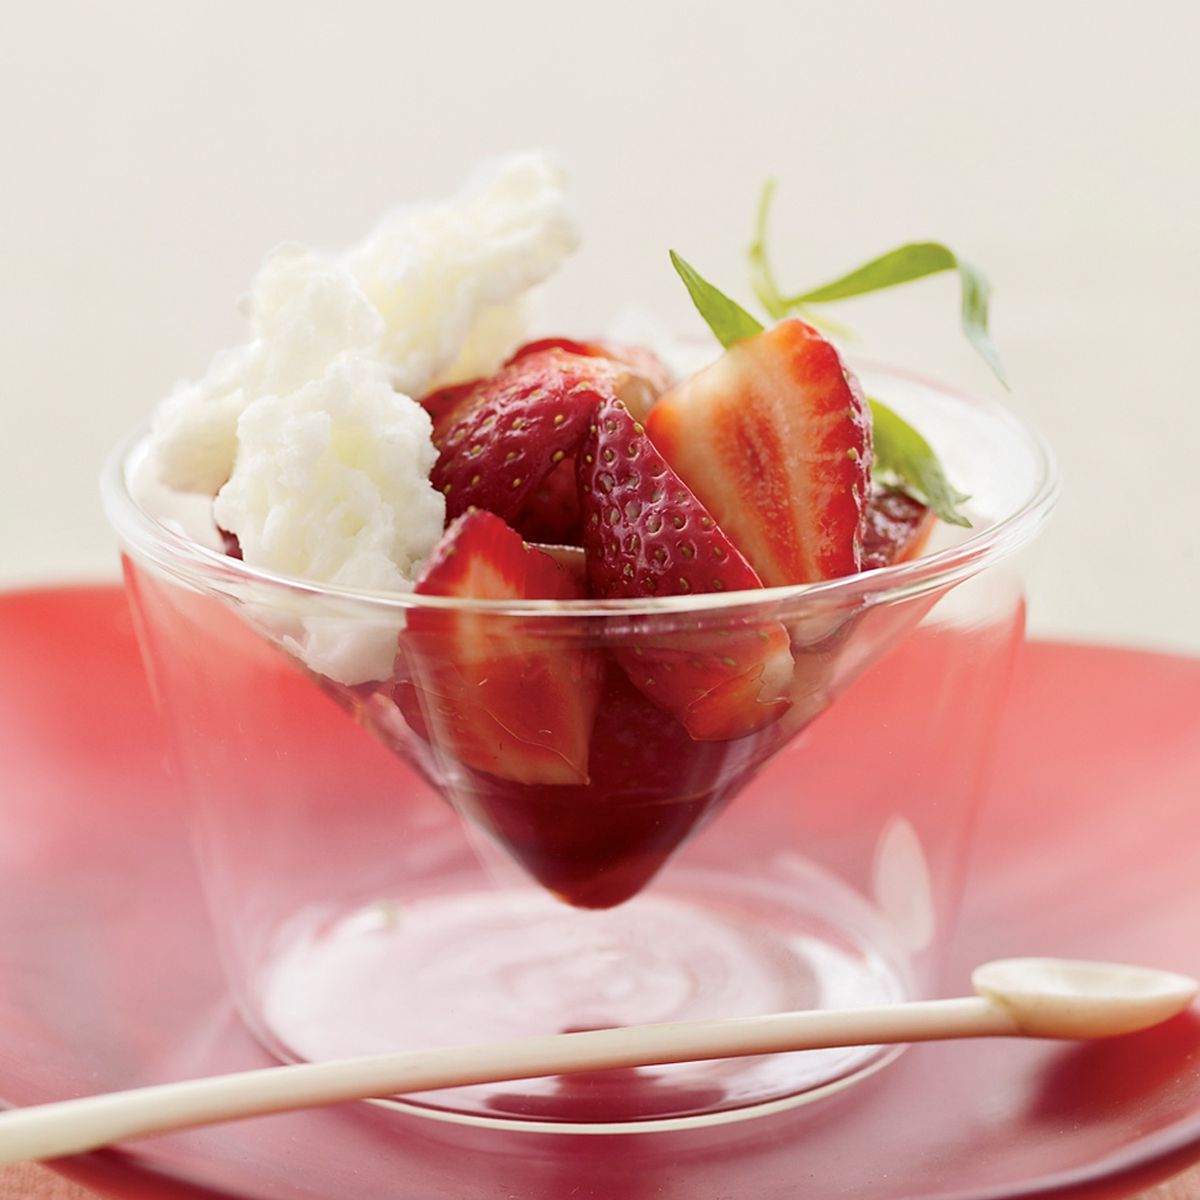 Strawberries with Buttermilk Ice and Balsamic Vinegar 